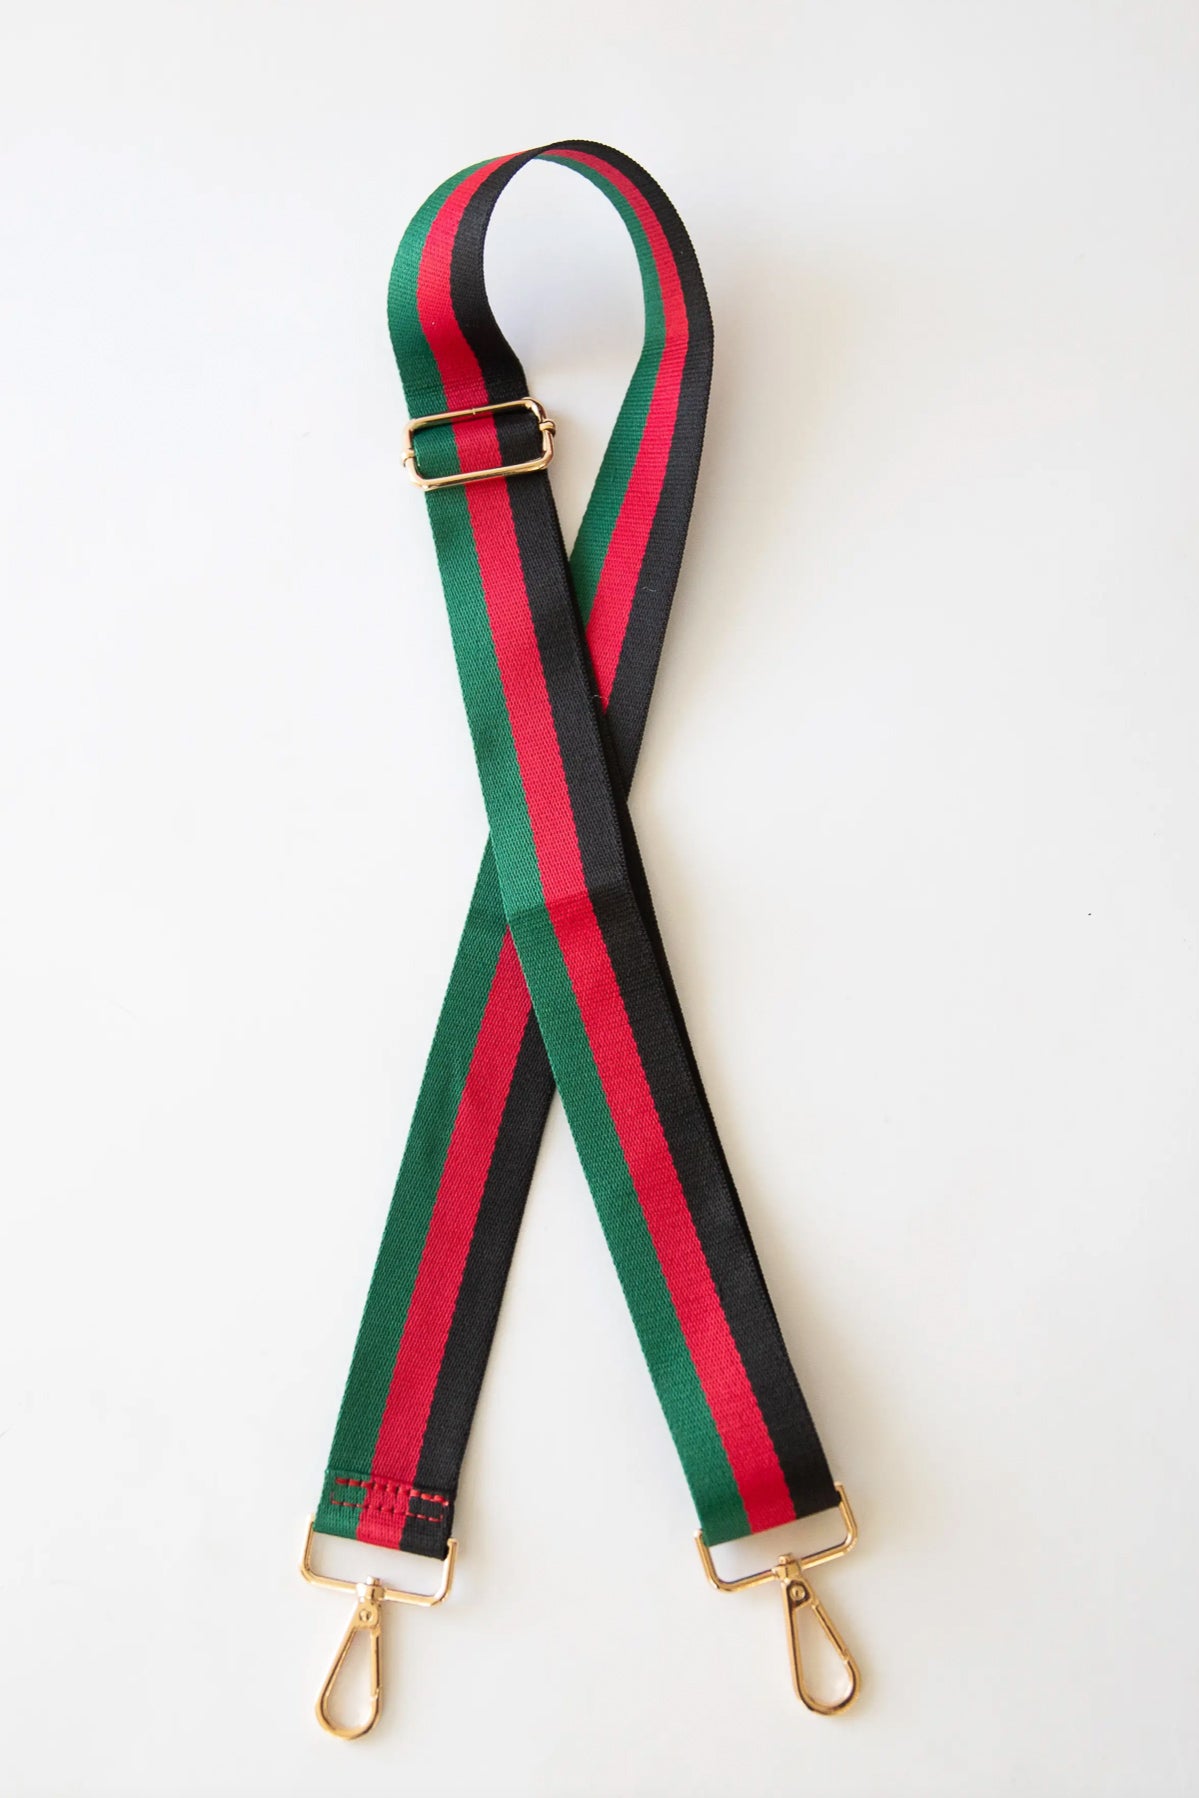 Guitar Style Bag and Camera Strap - Green/Red/Black